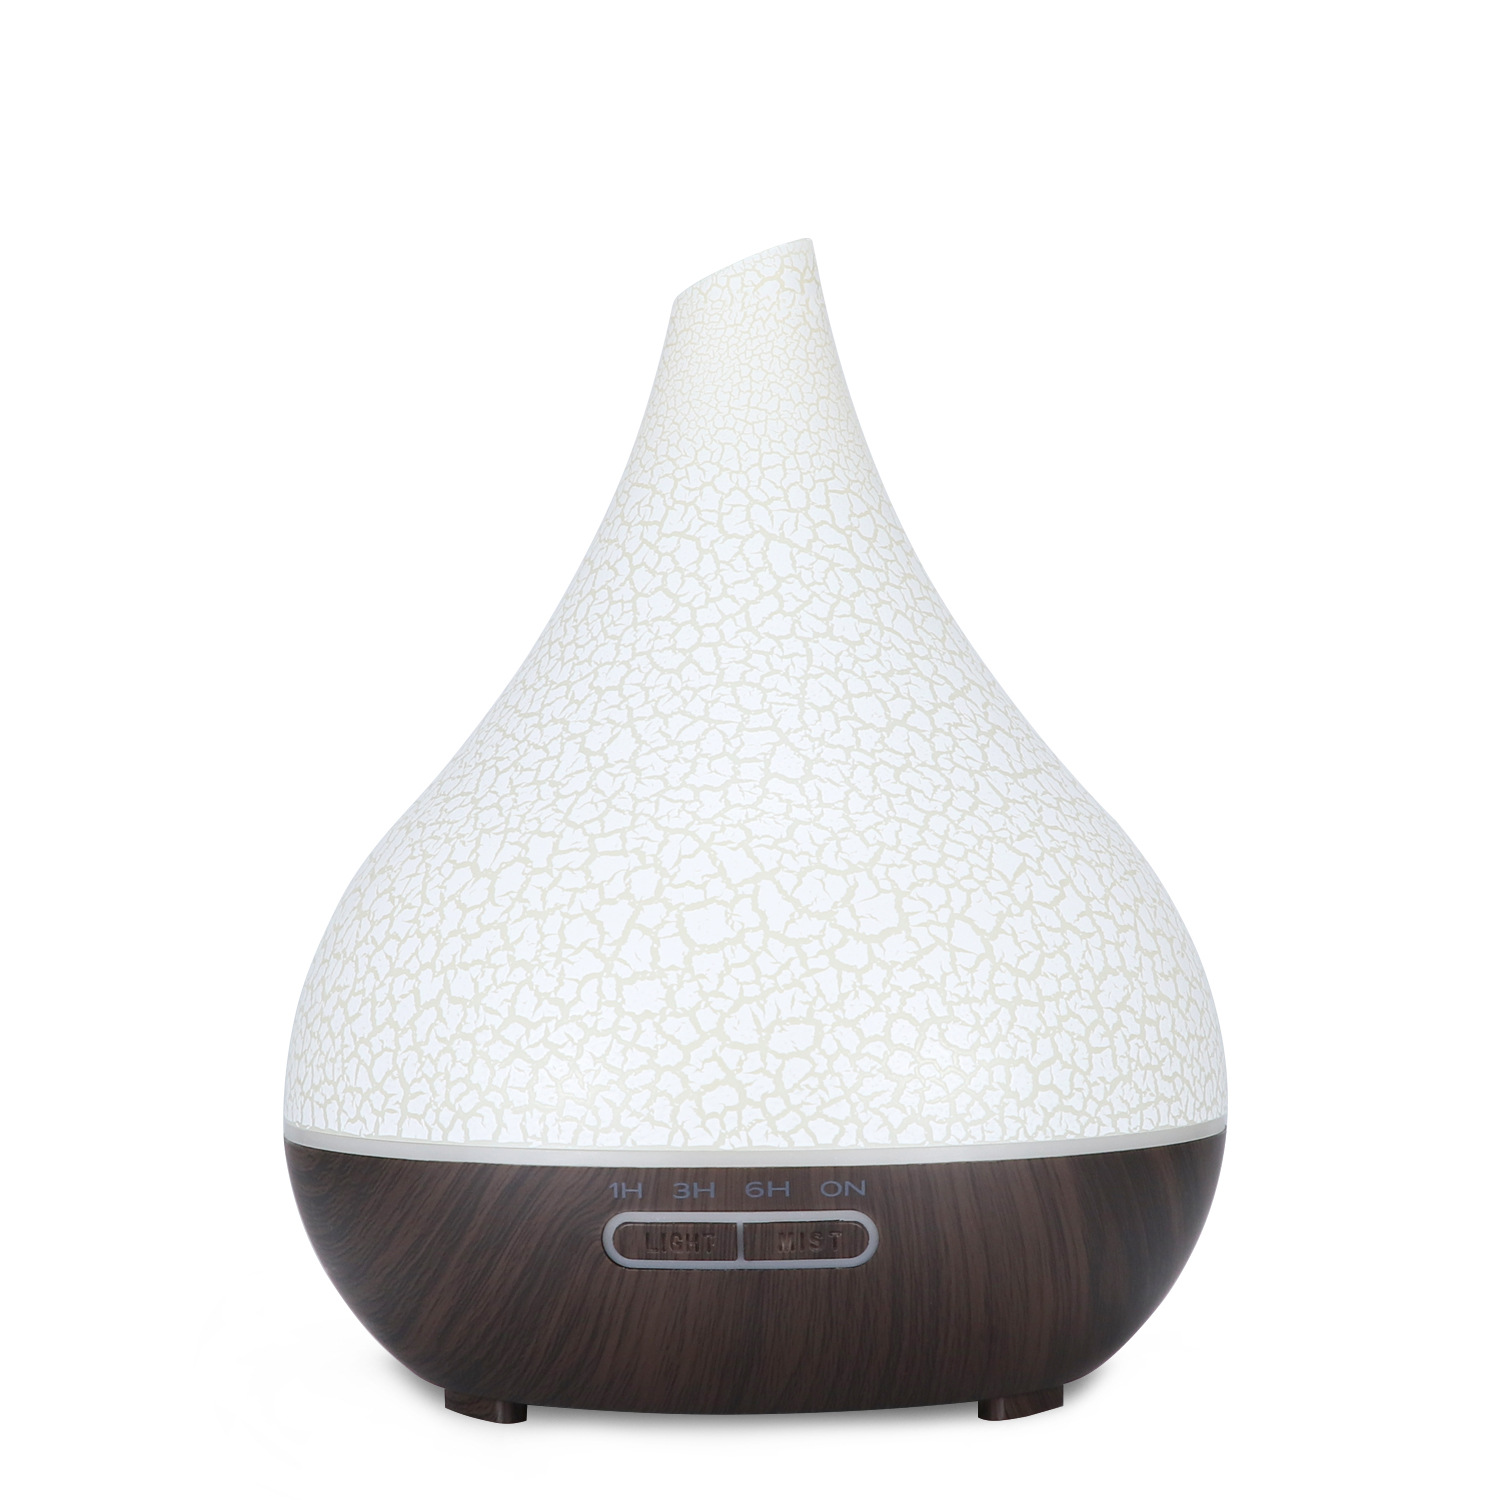 400ml Cracked Shell Timing Home Humidifier 7 Color LED Ultrasonic Aroma Diffuser